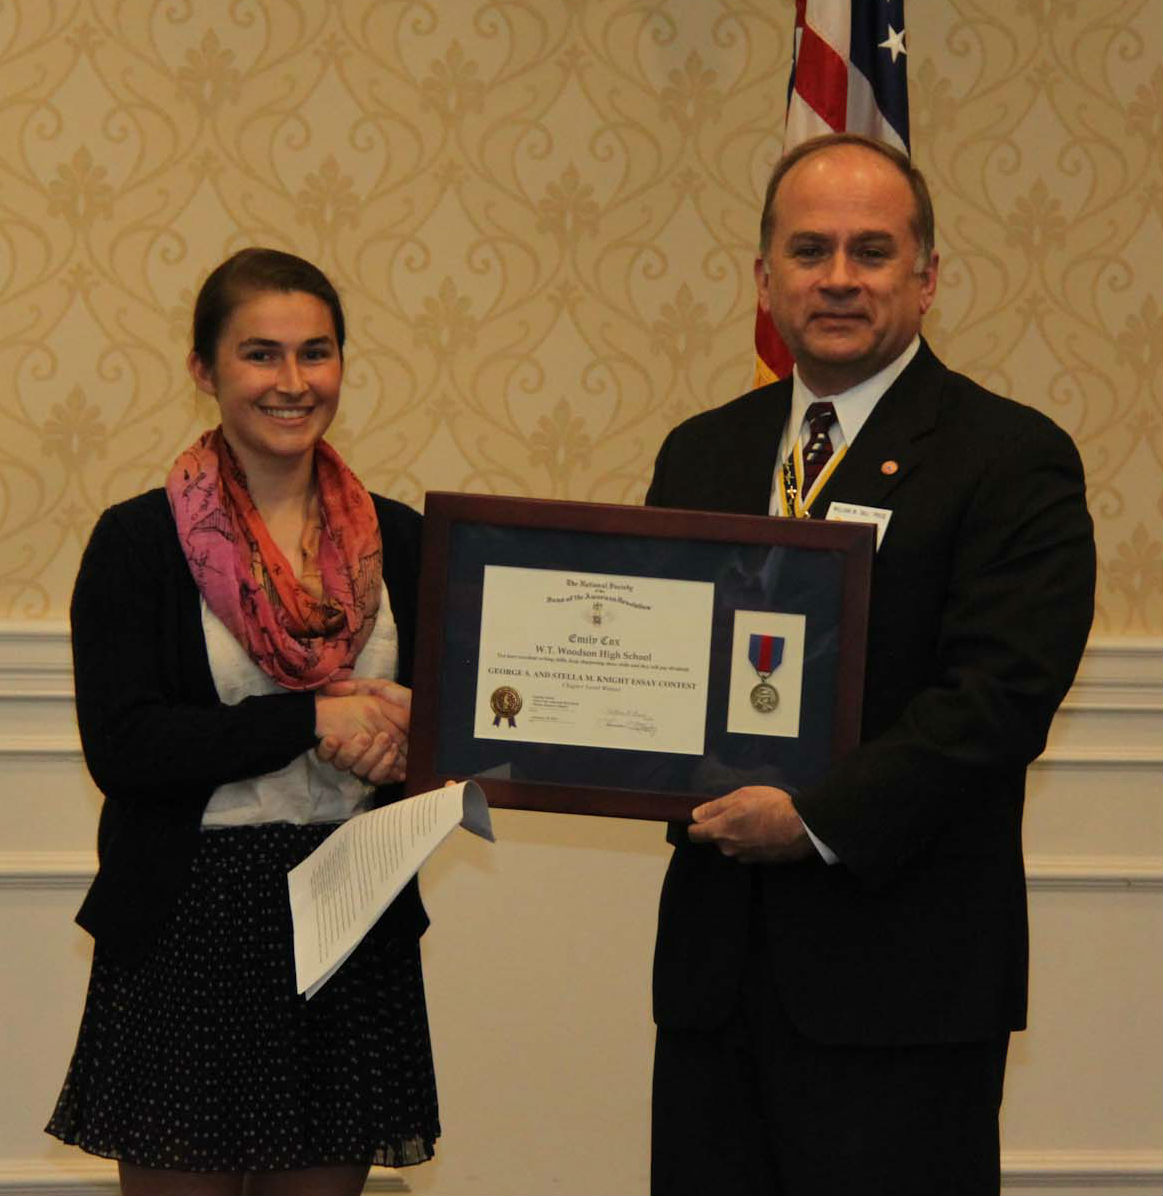 Chapter President Bill Price presents Ms. Cox with the award for her winning essay